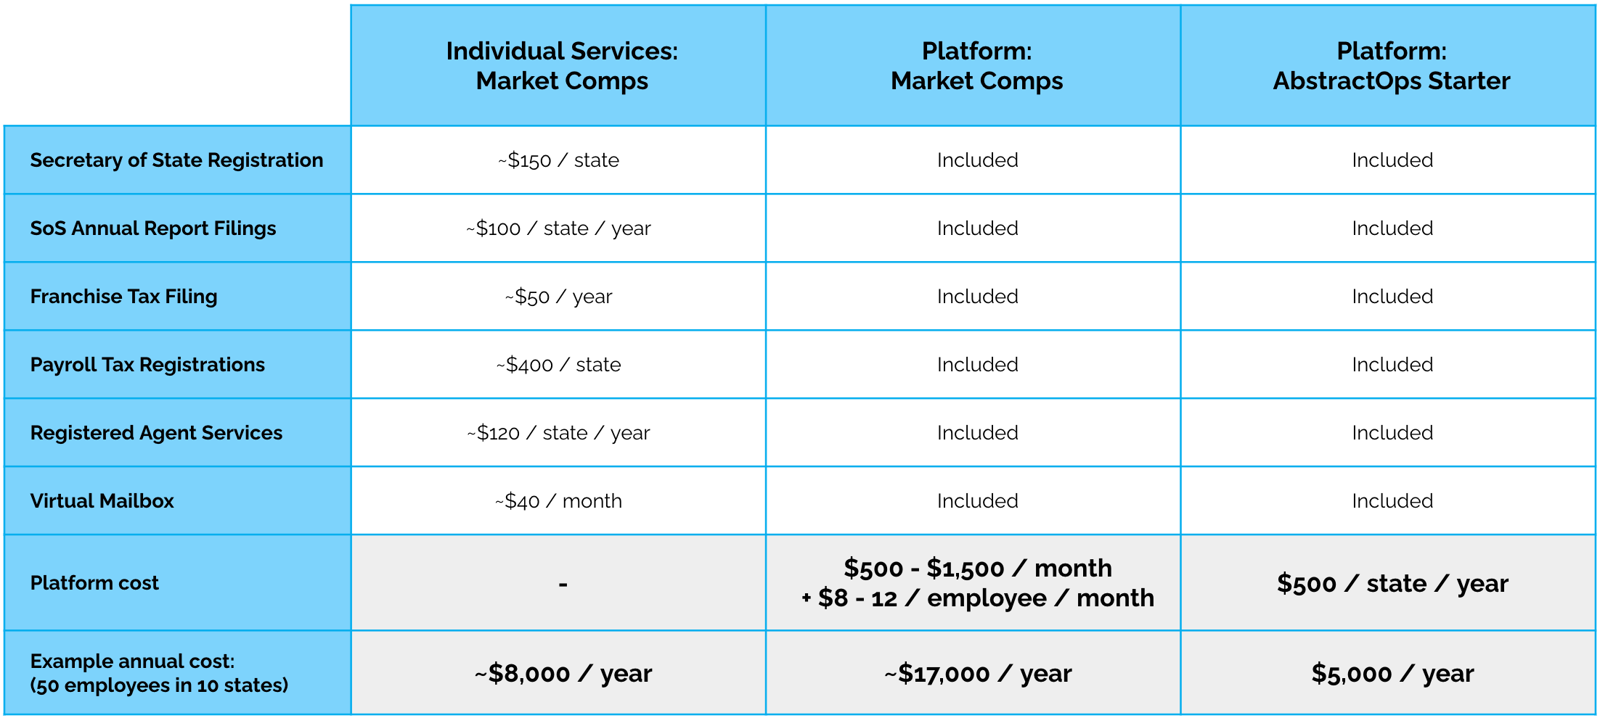 Comparing the costs of ad hoc compliance services versus platform approaches.